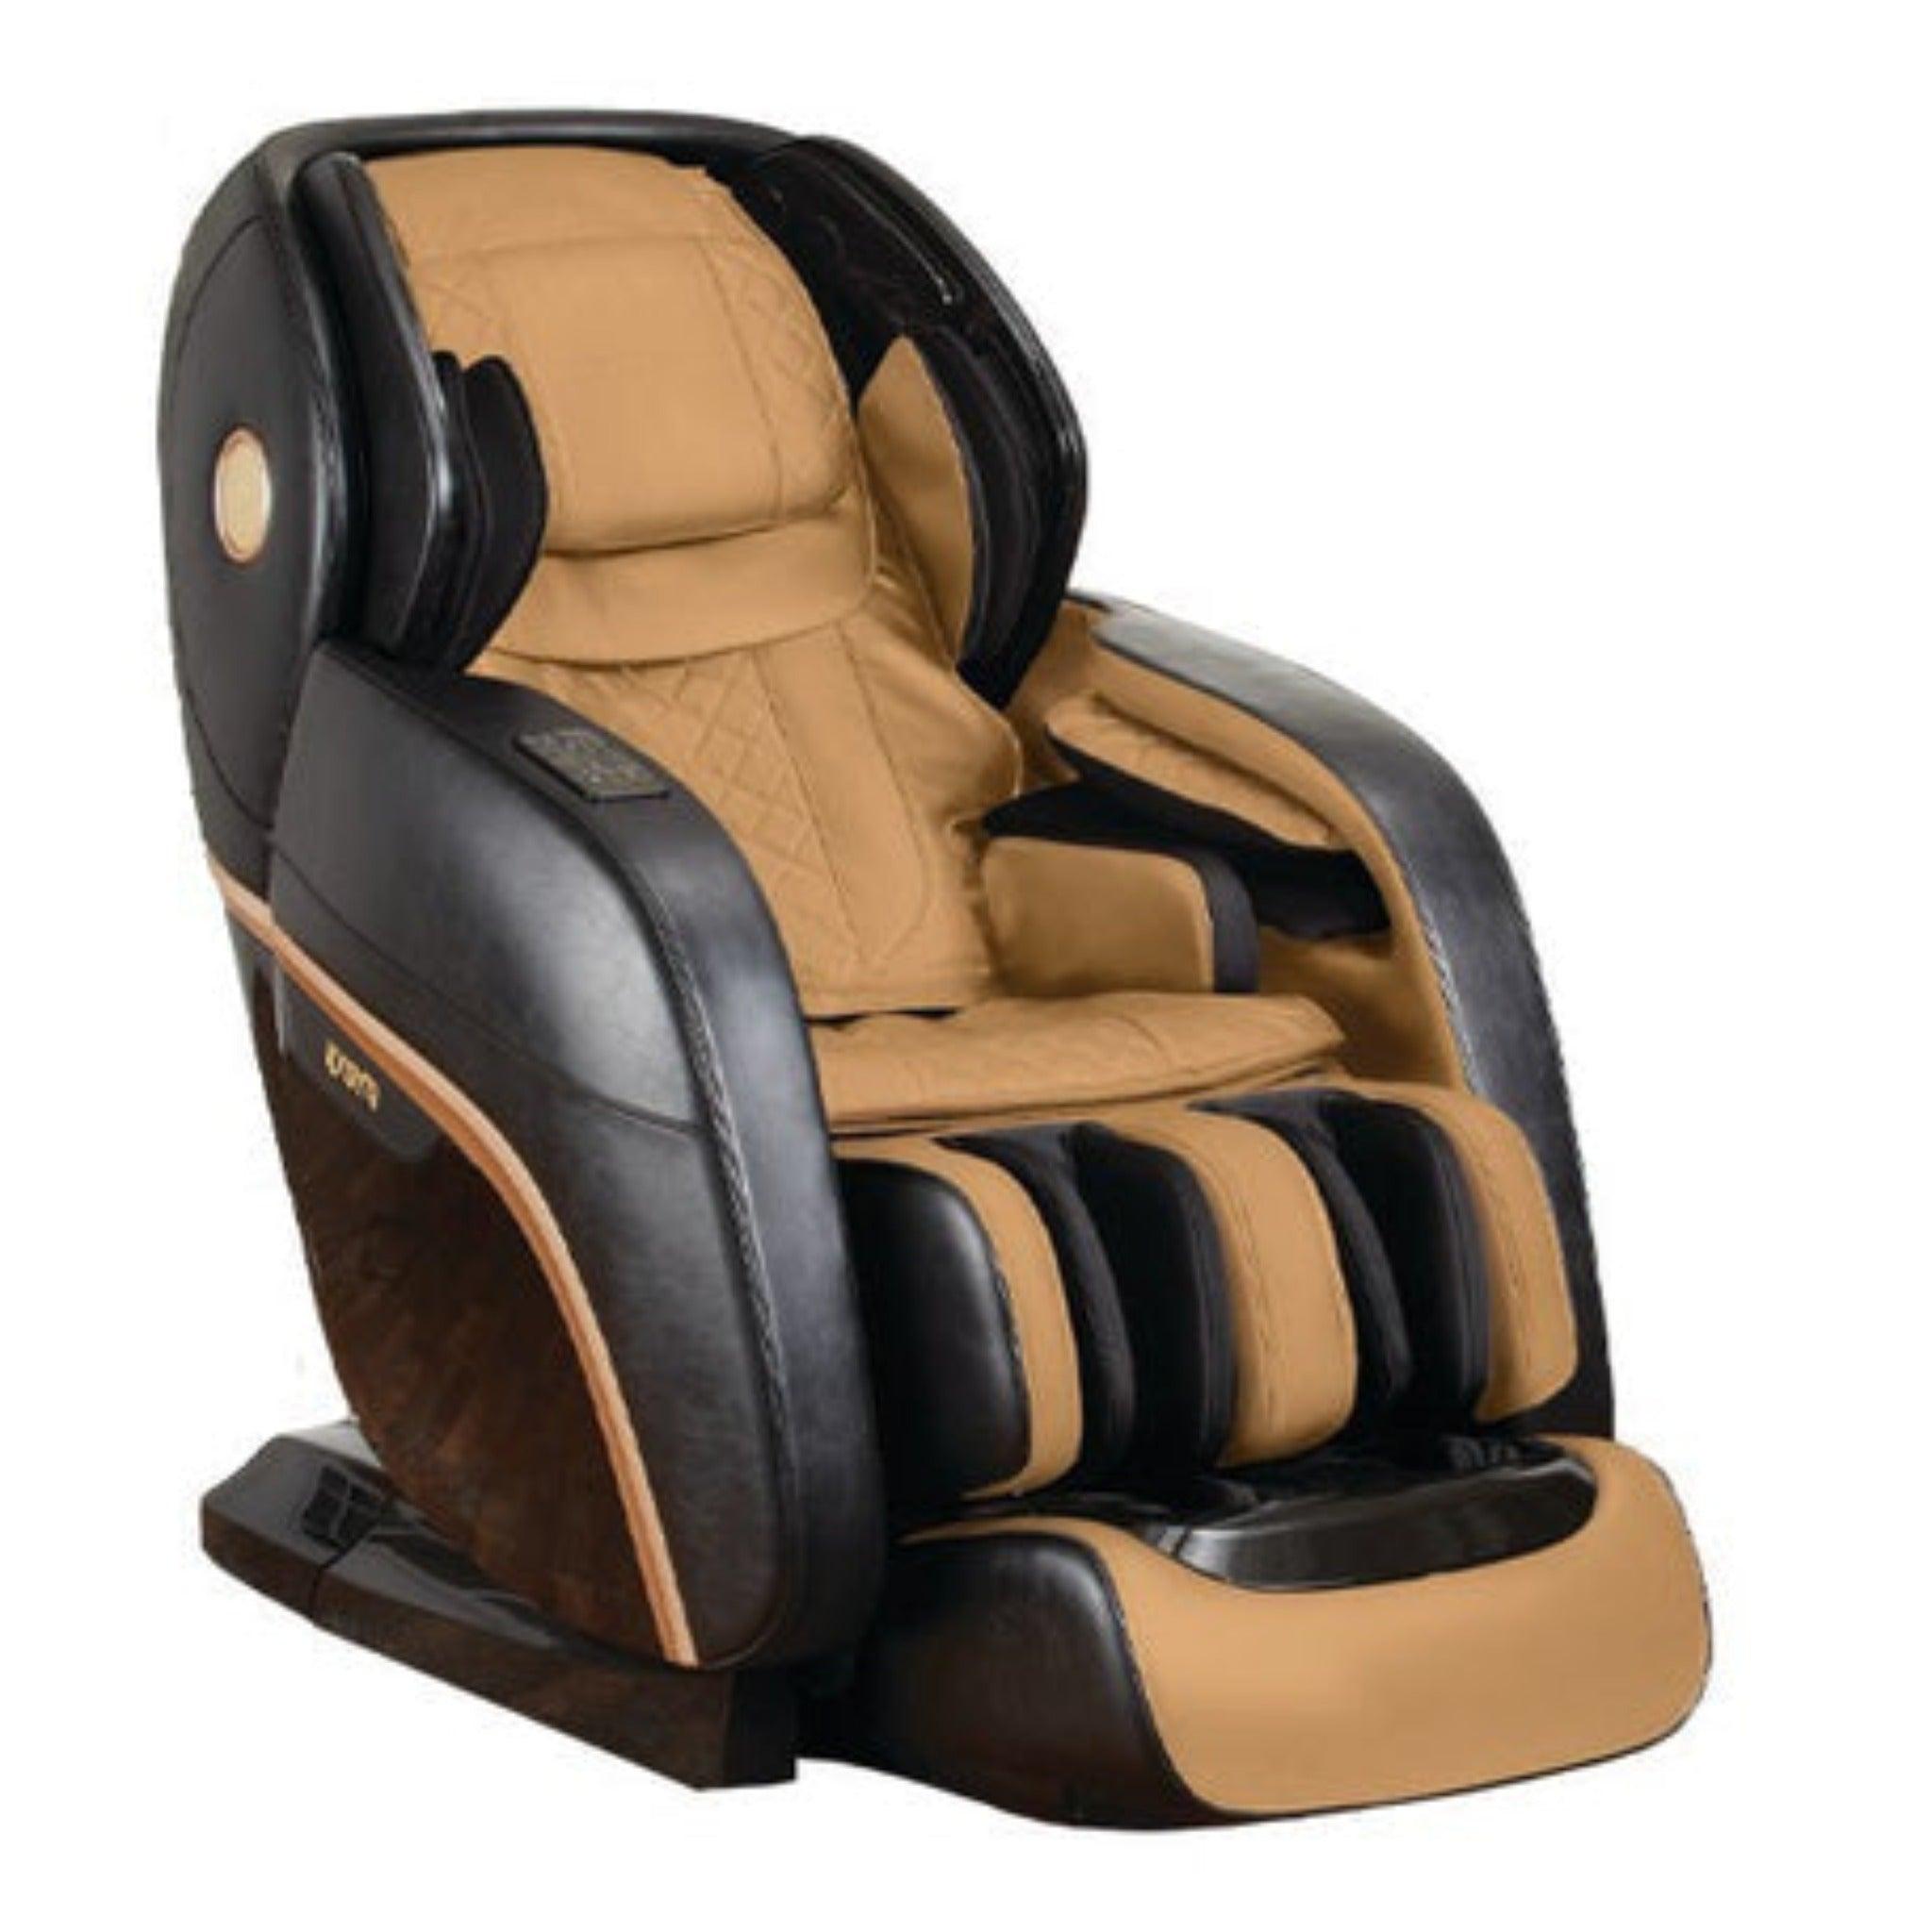 Kyota Kokoro M888 Massage Chair | Certified Pre-Owned